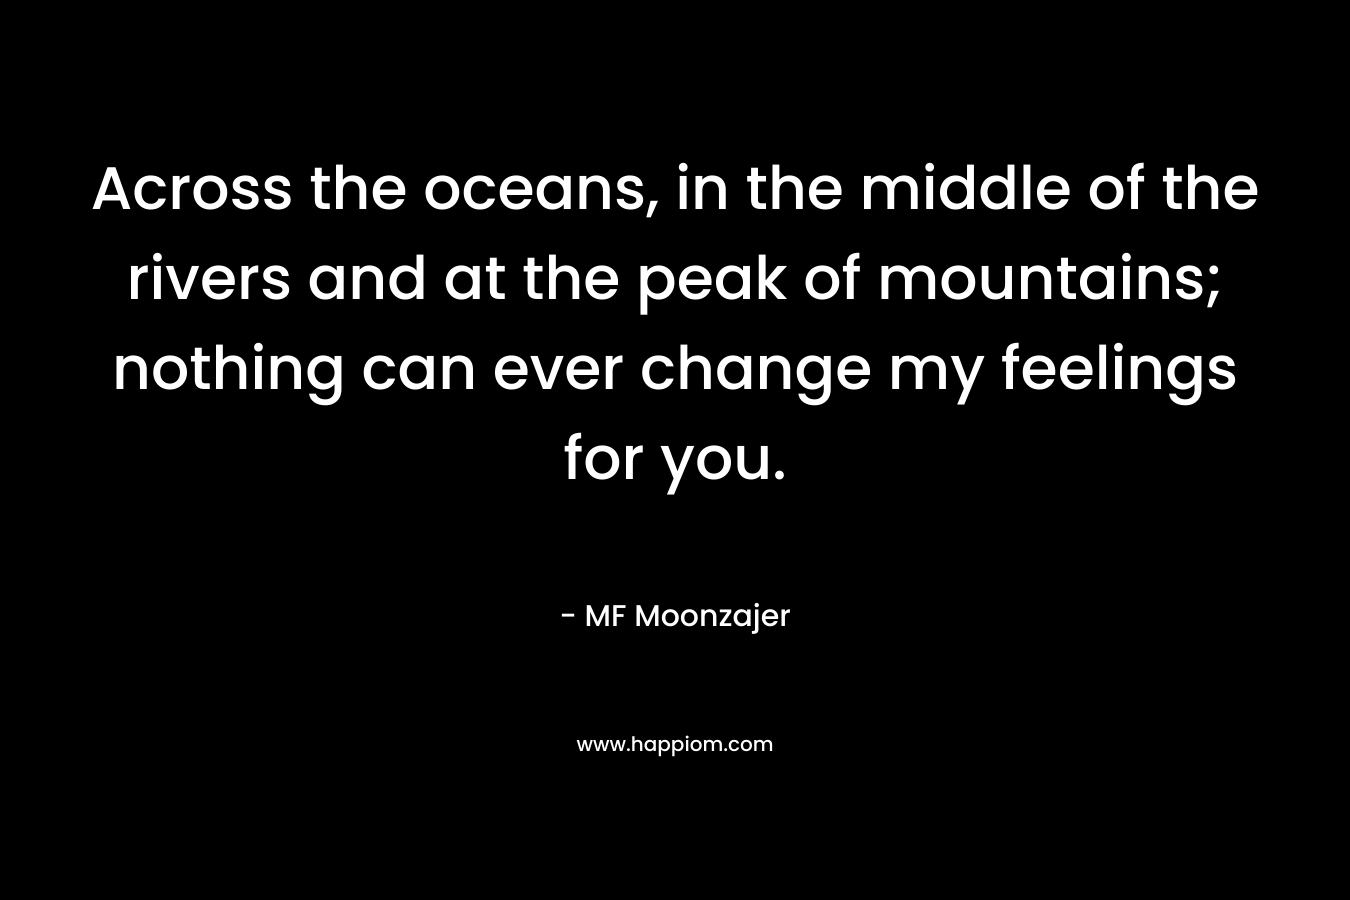 Across the oceans, in the middle of the rivers and at the peak of mountains; nothing can ever change my feelings for you. – MF Moonzajer